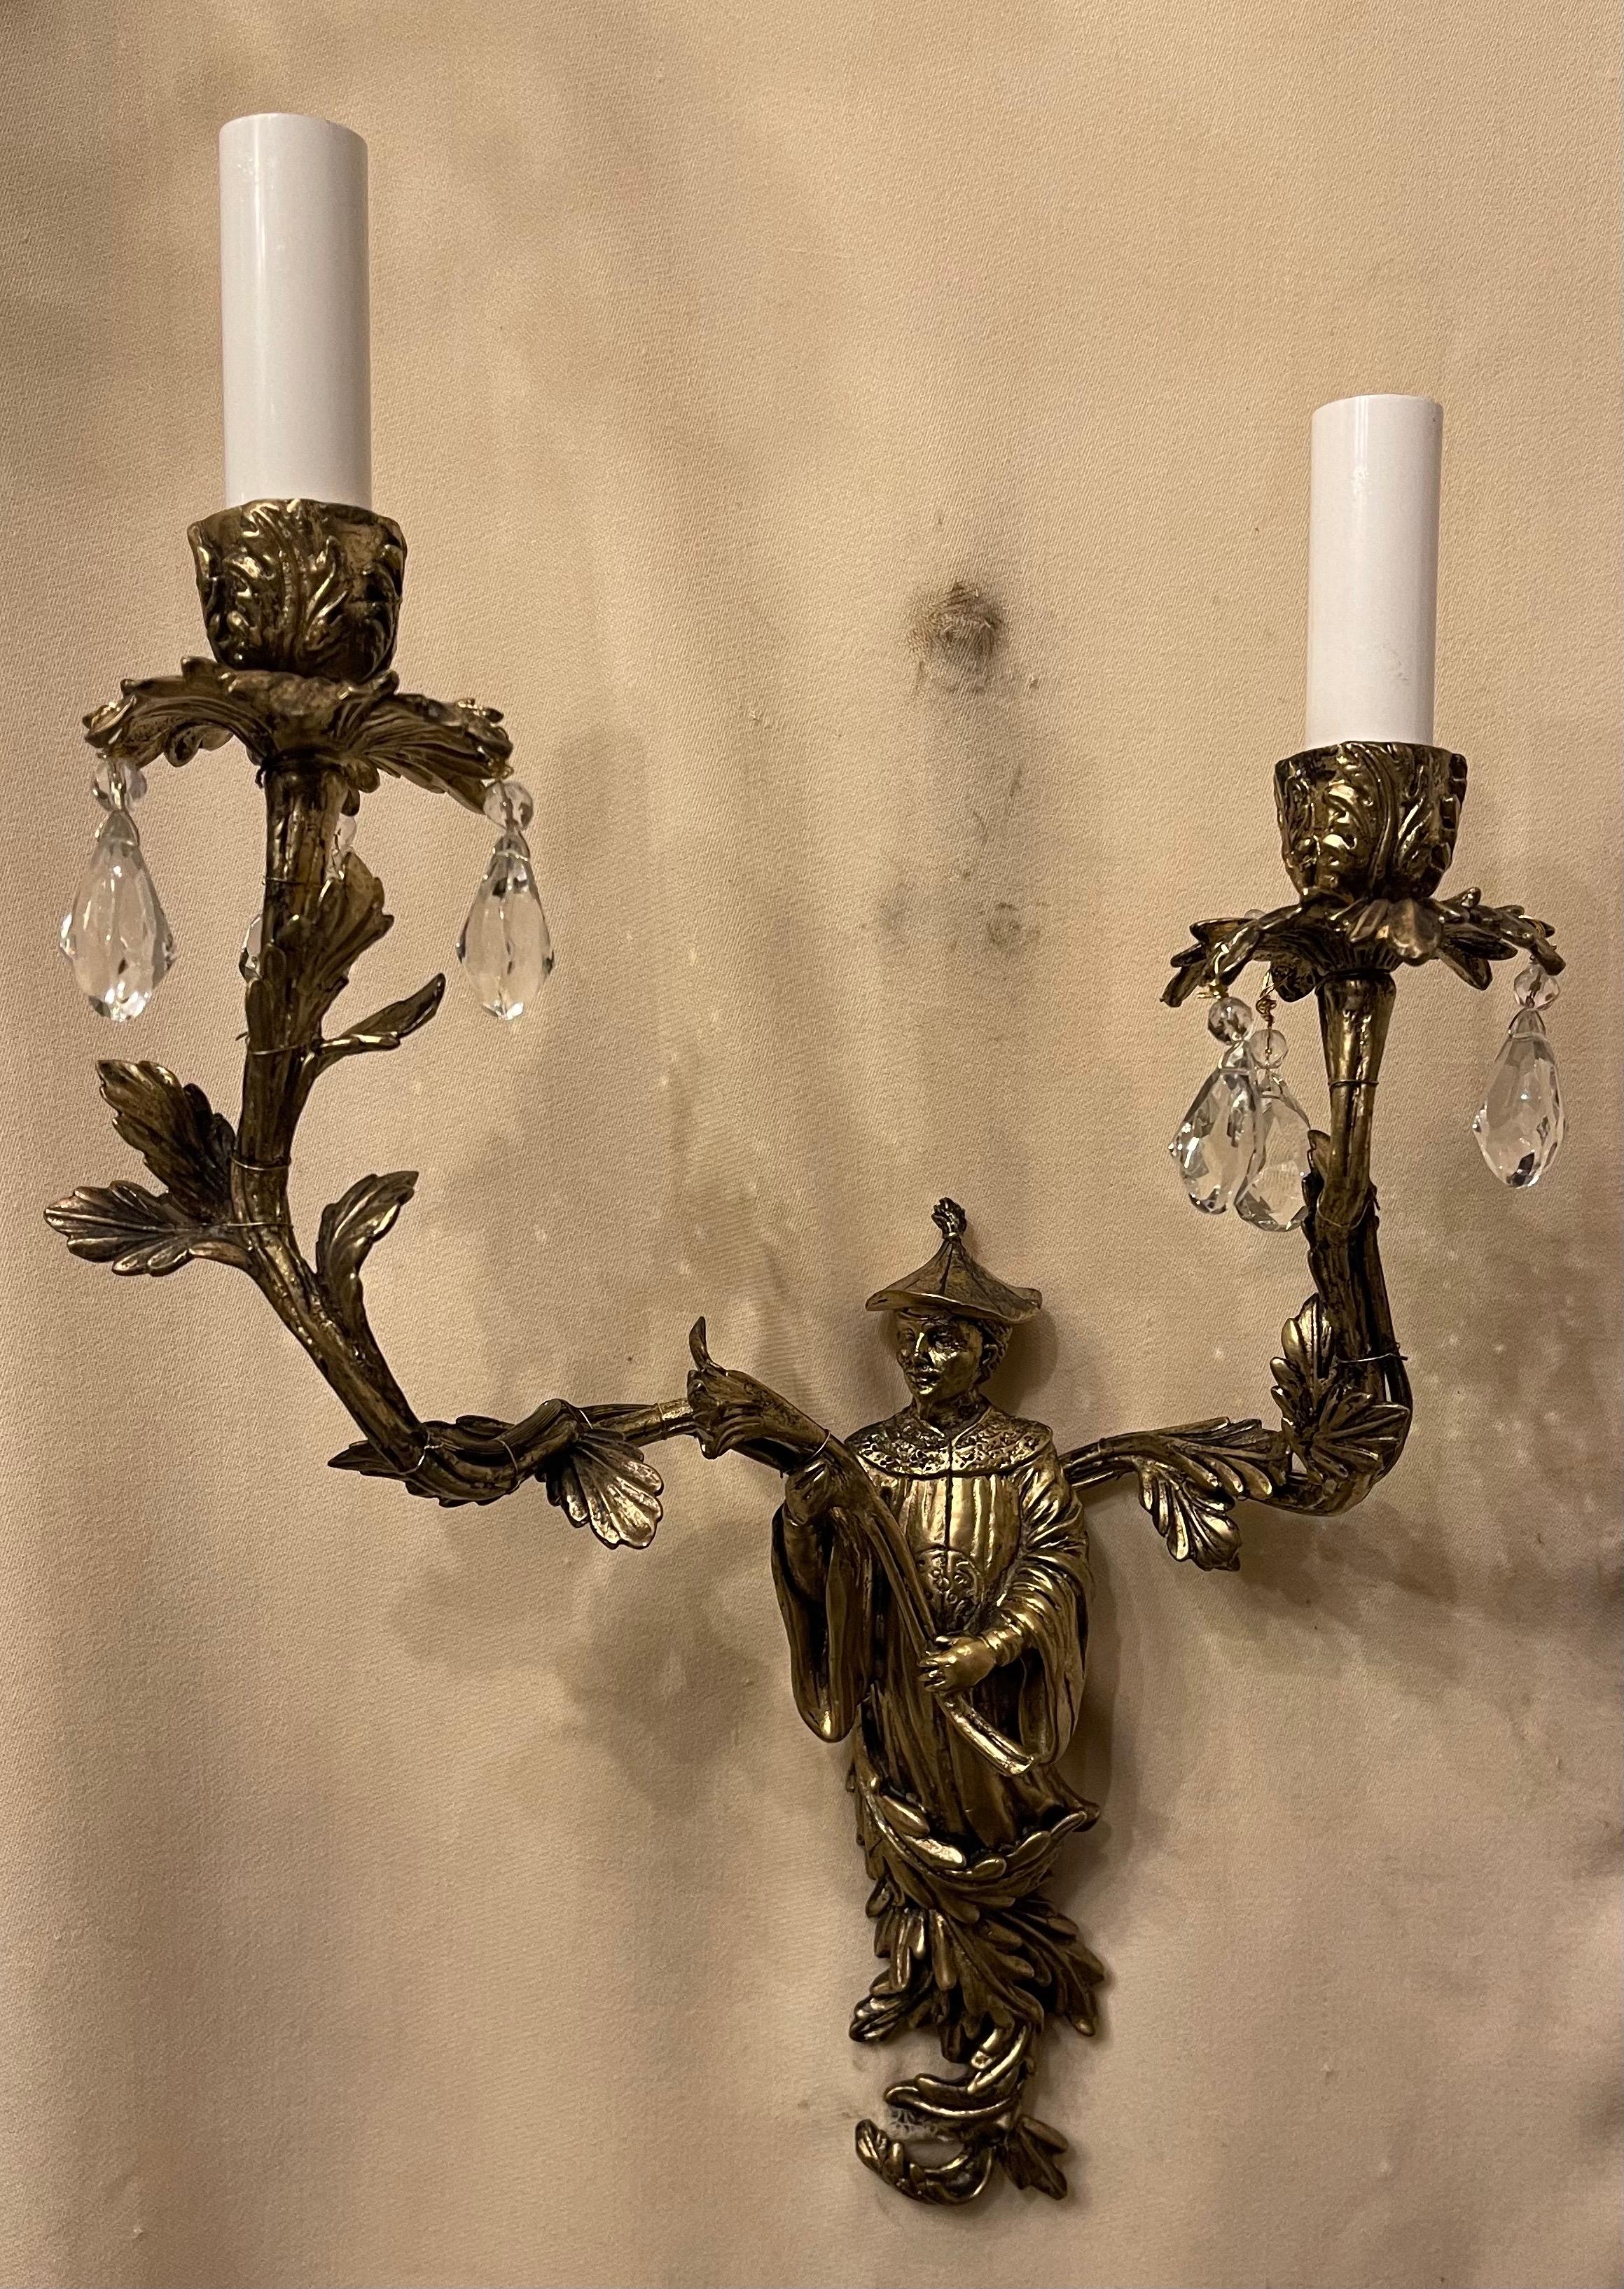 A wonderful vintage pair of bronze chinoiserie figure and crystal drop two candelabra light sconces, rewired with new sockets and ready to install.